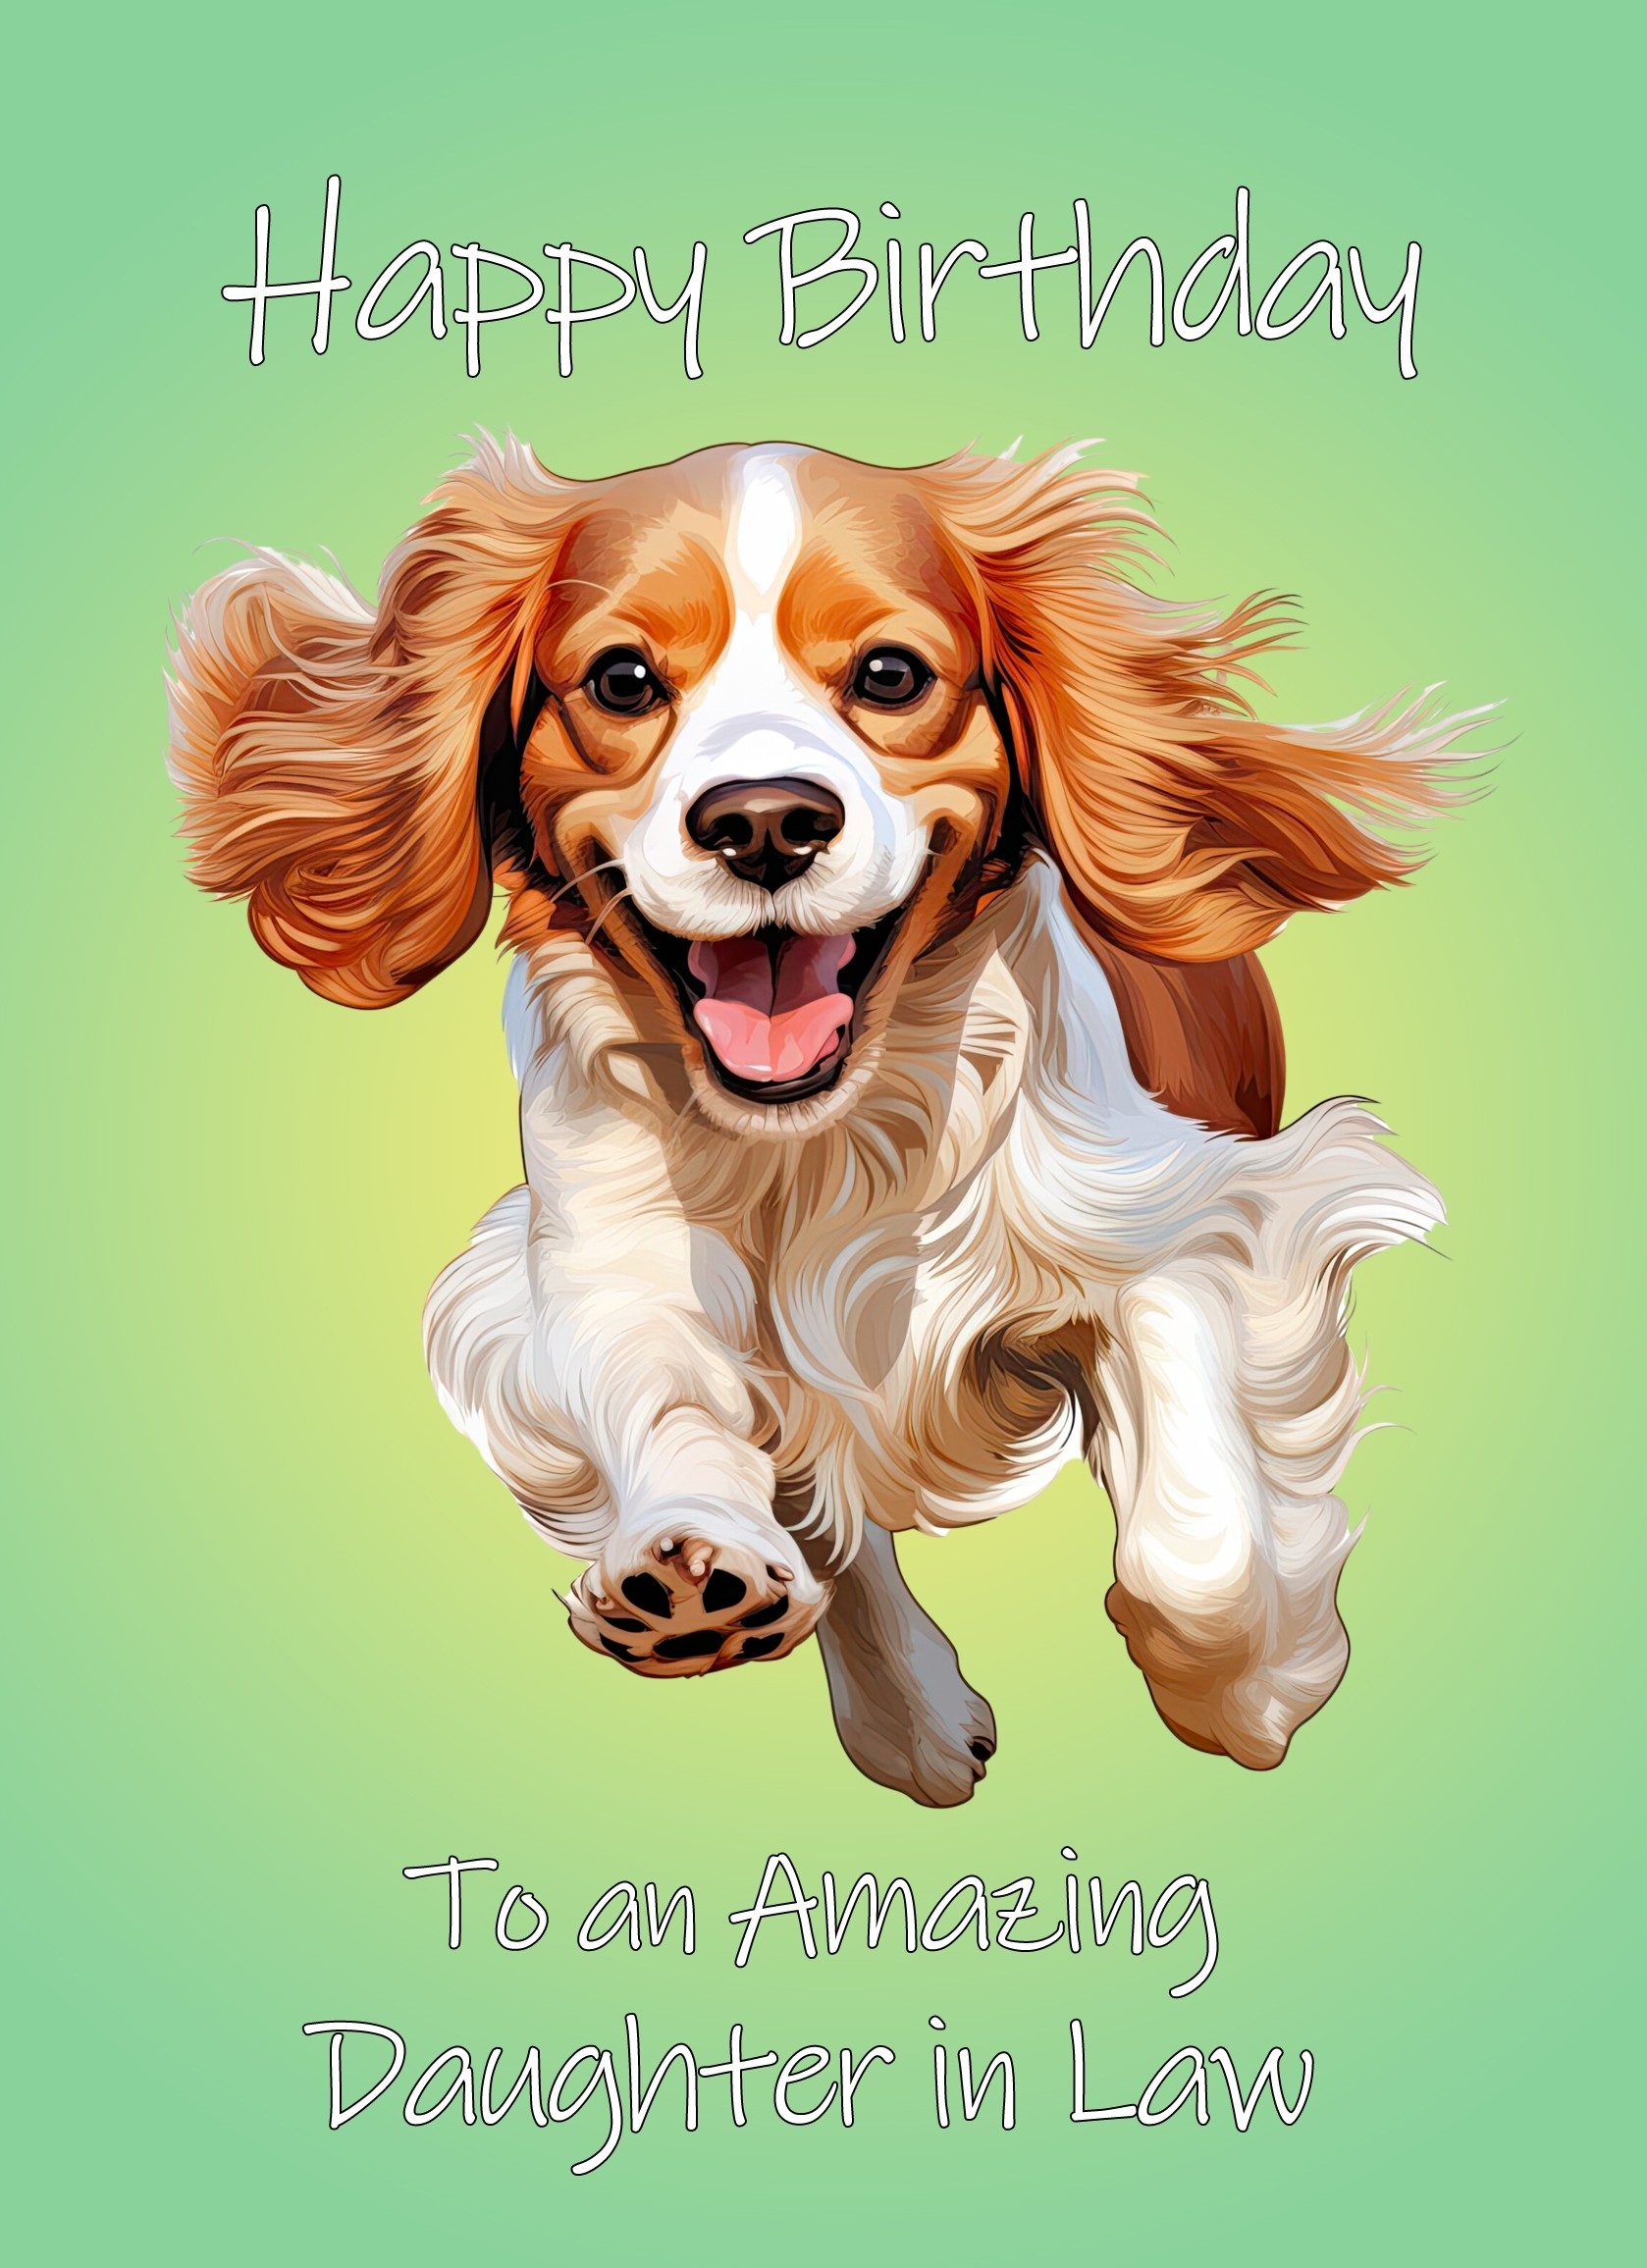 Cavalier King Charles Spaniel Dog Birthday Card For Daughter in Law